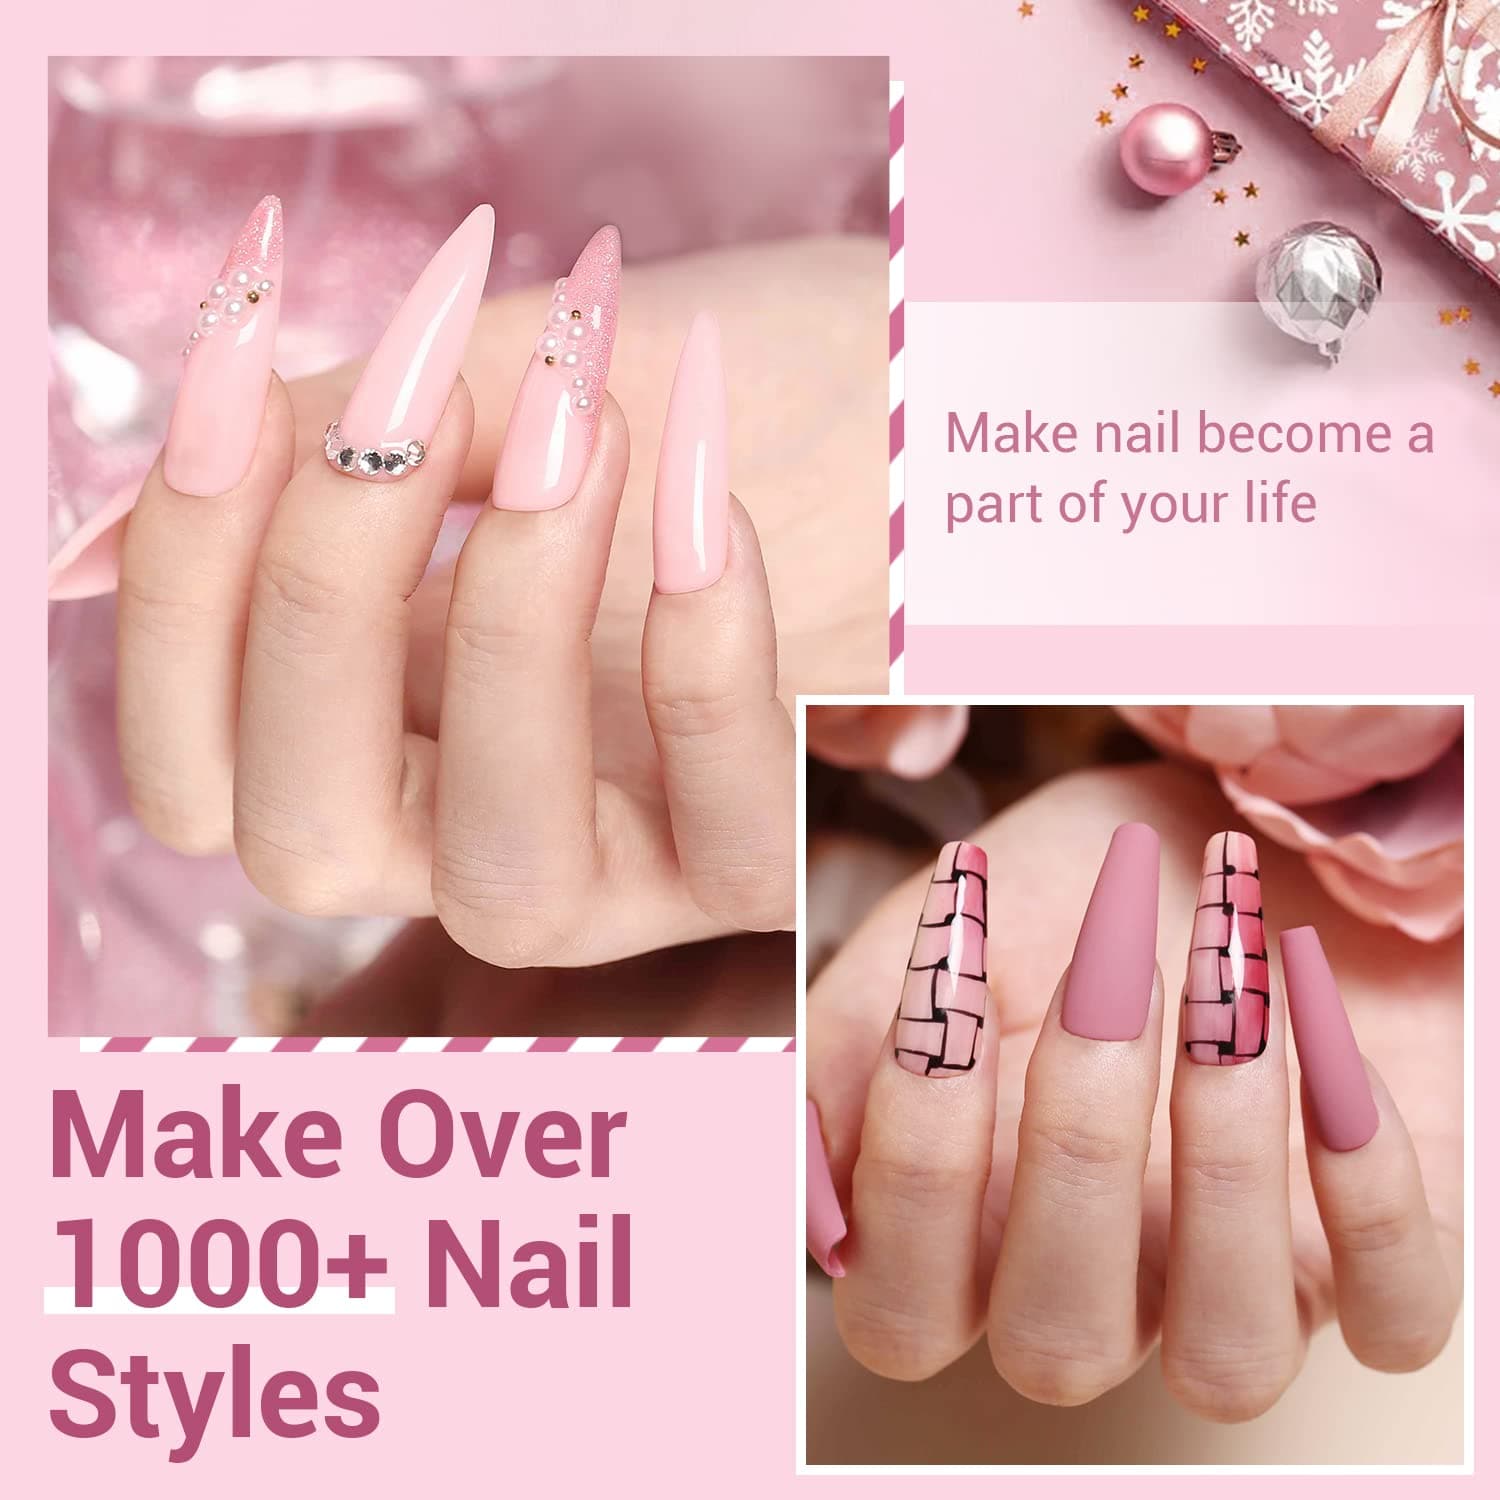 27 Light Nail Colors Fashion Girls Love | Who What Wear